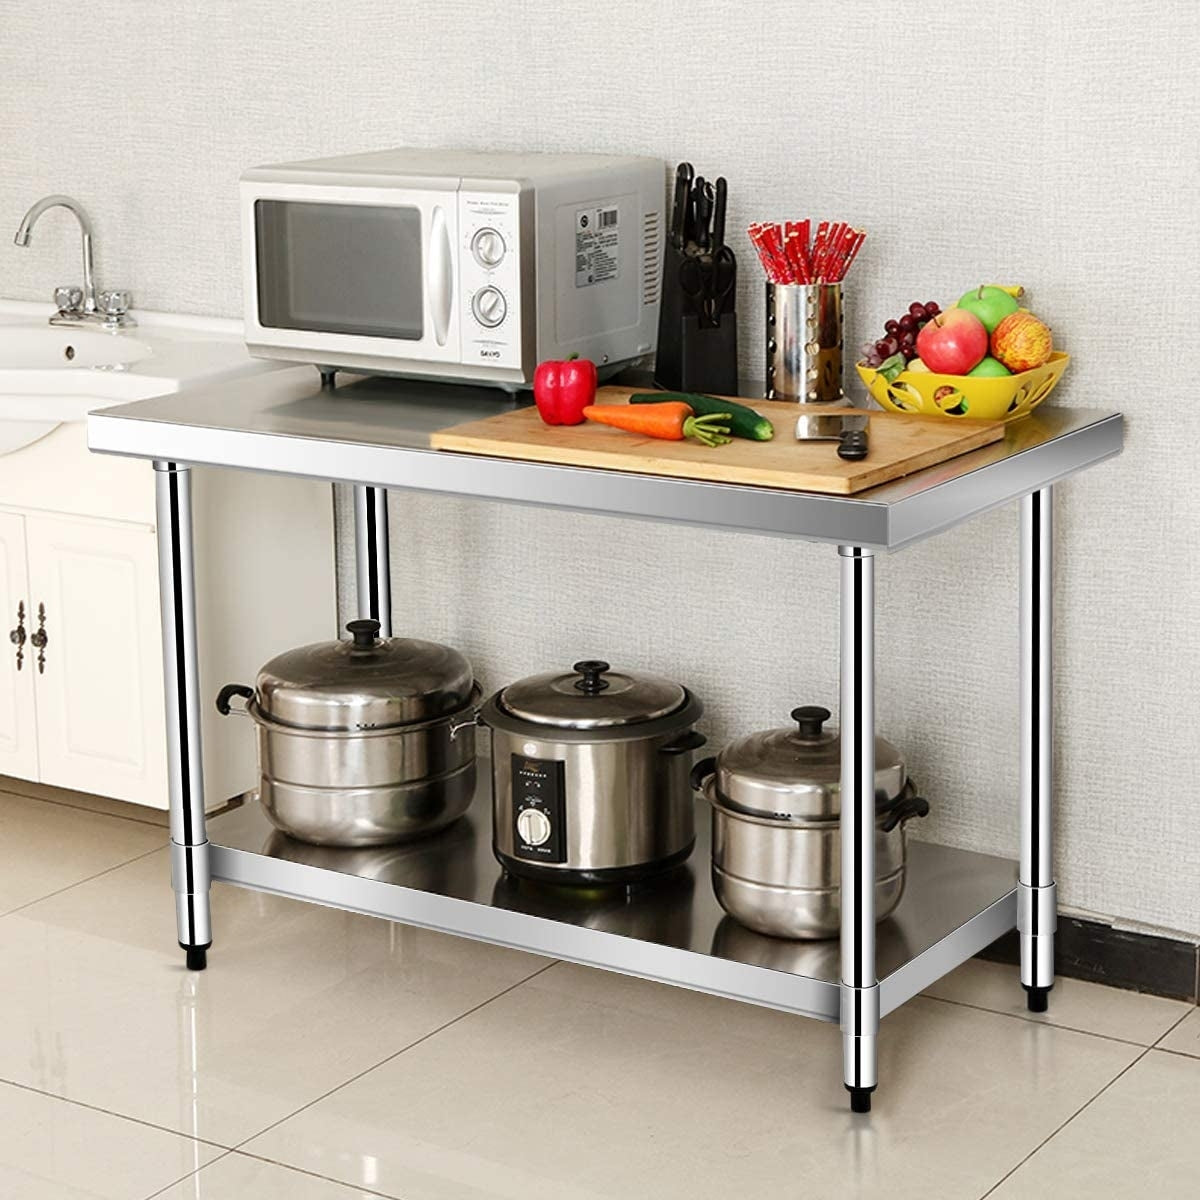 24Inch x 36Inch Stainless Steel Commercial Kitchen Food Prep Table